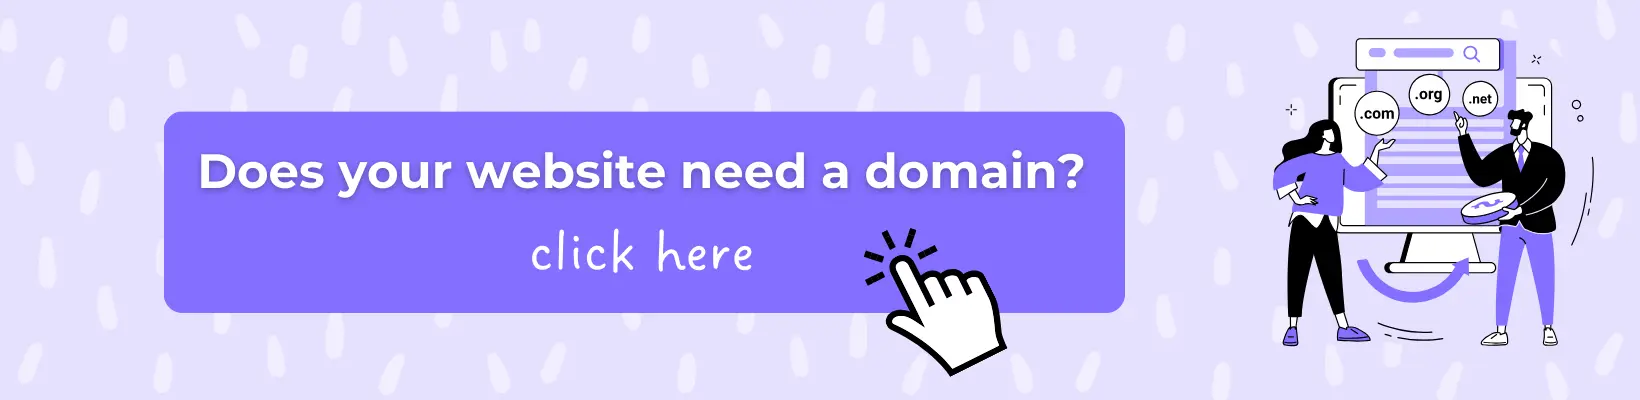 Buying a domain with free hosting as a gift